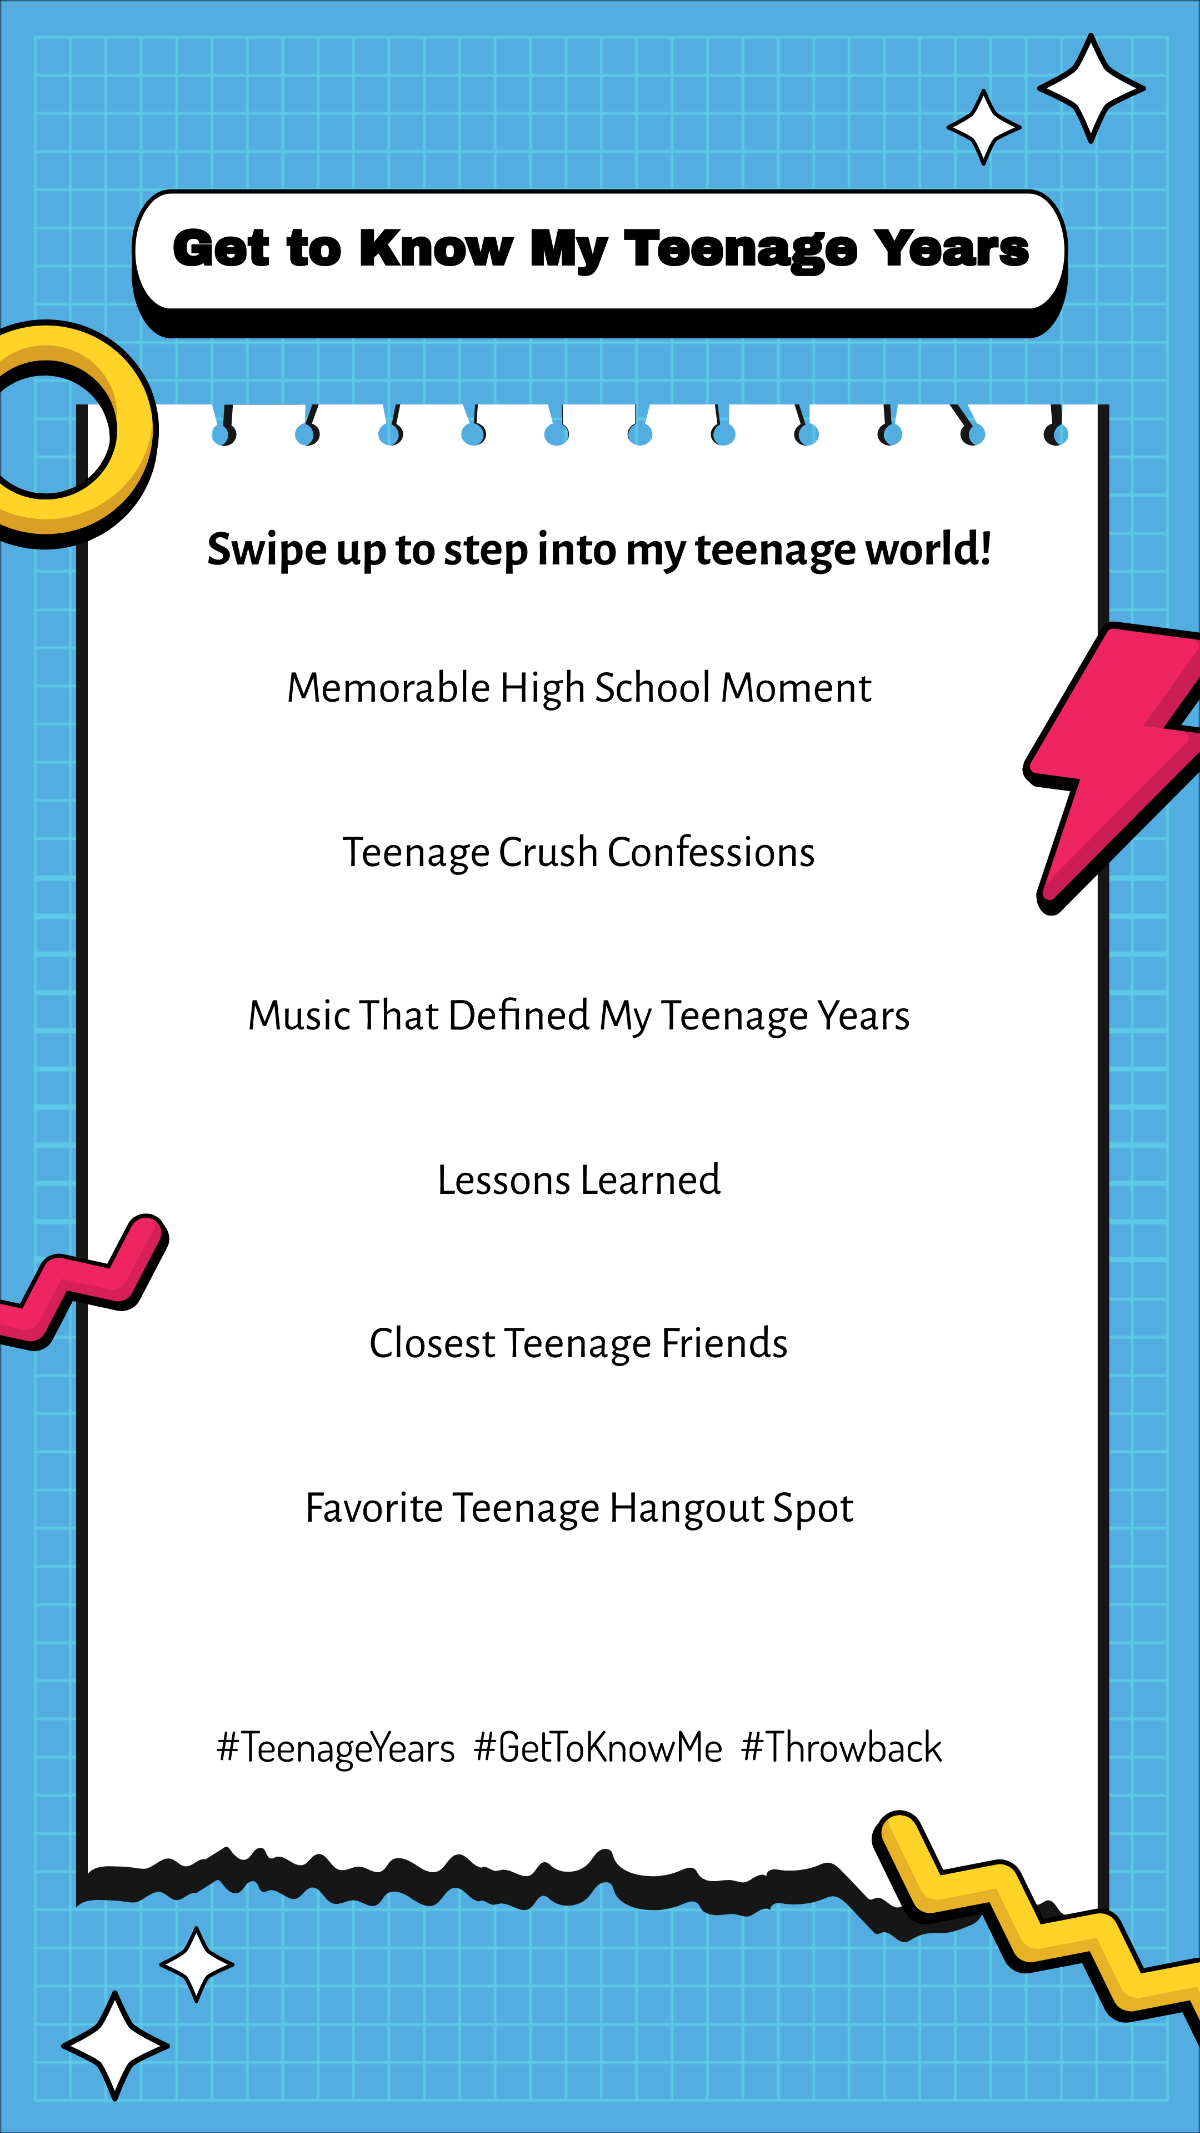 Get to Know My Teenage Years Post Template